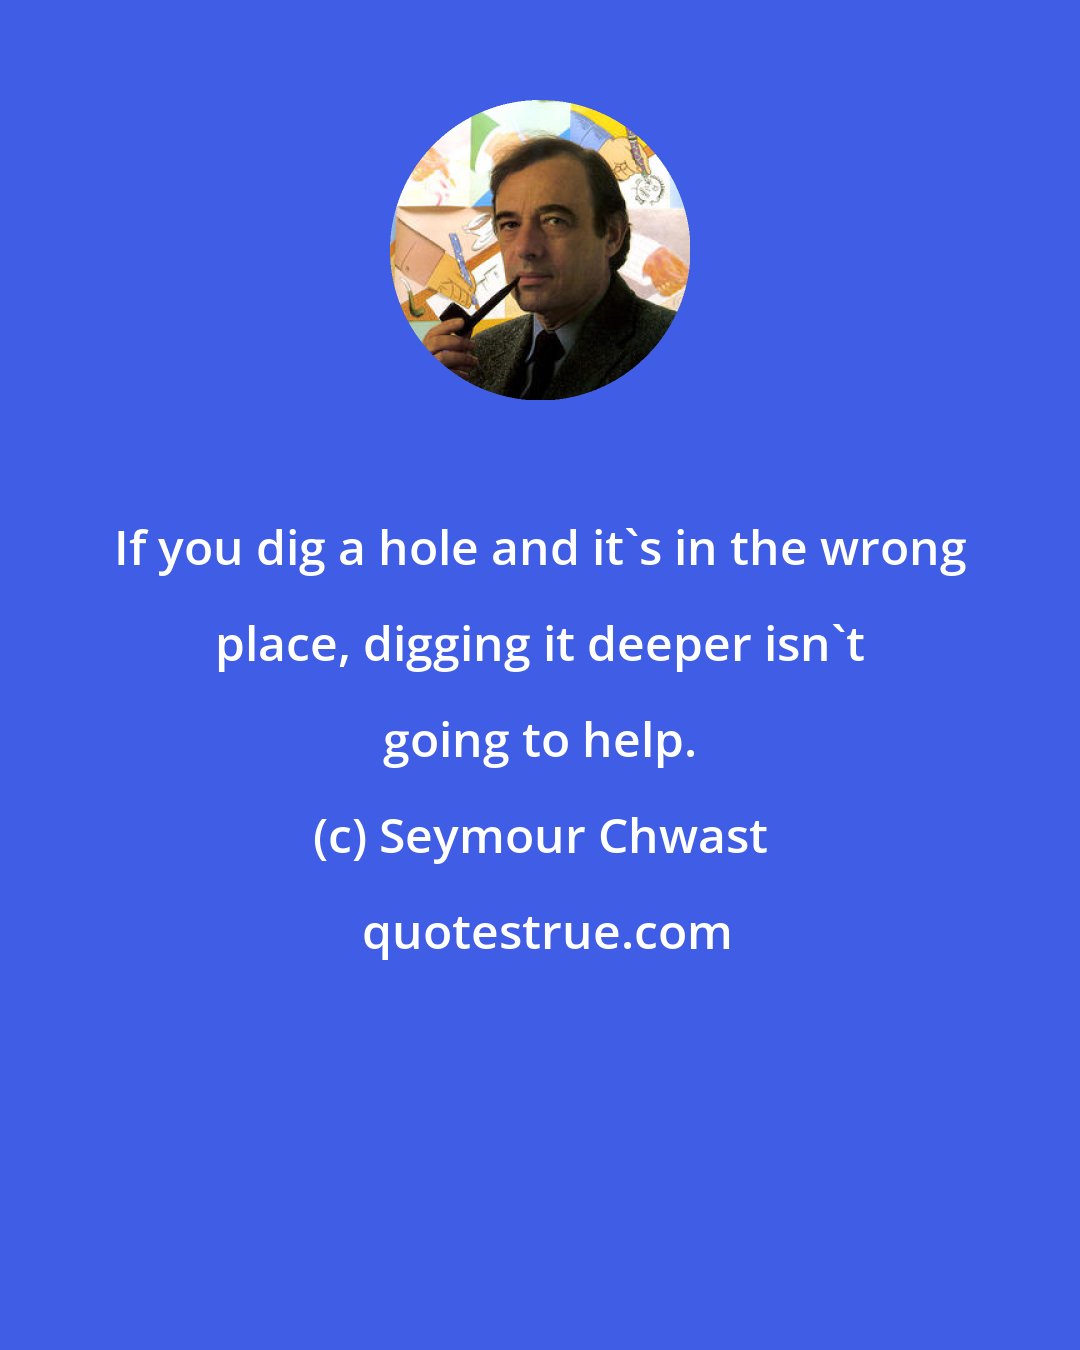 Seymour Chwast: If you dig a hole and it's in the wrong place, digging it deeper isn't going to help.